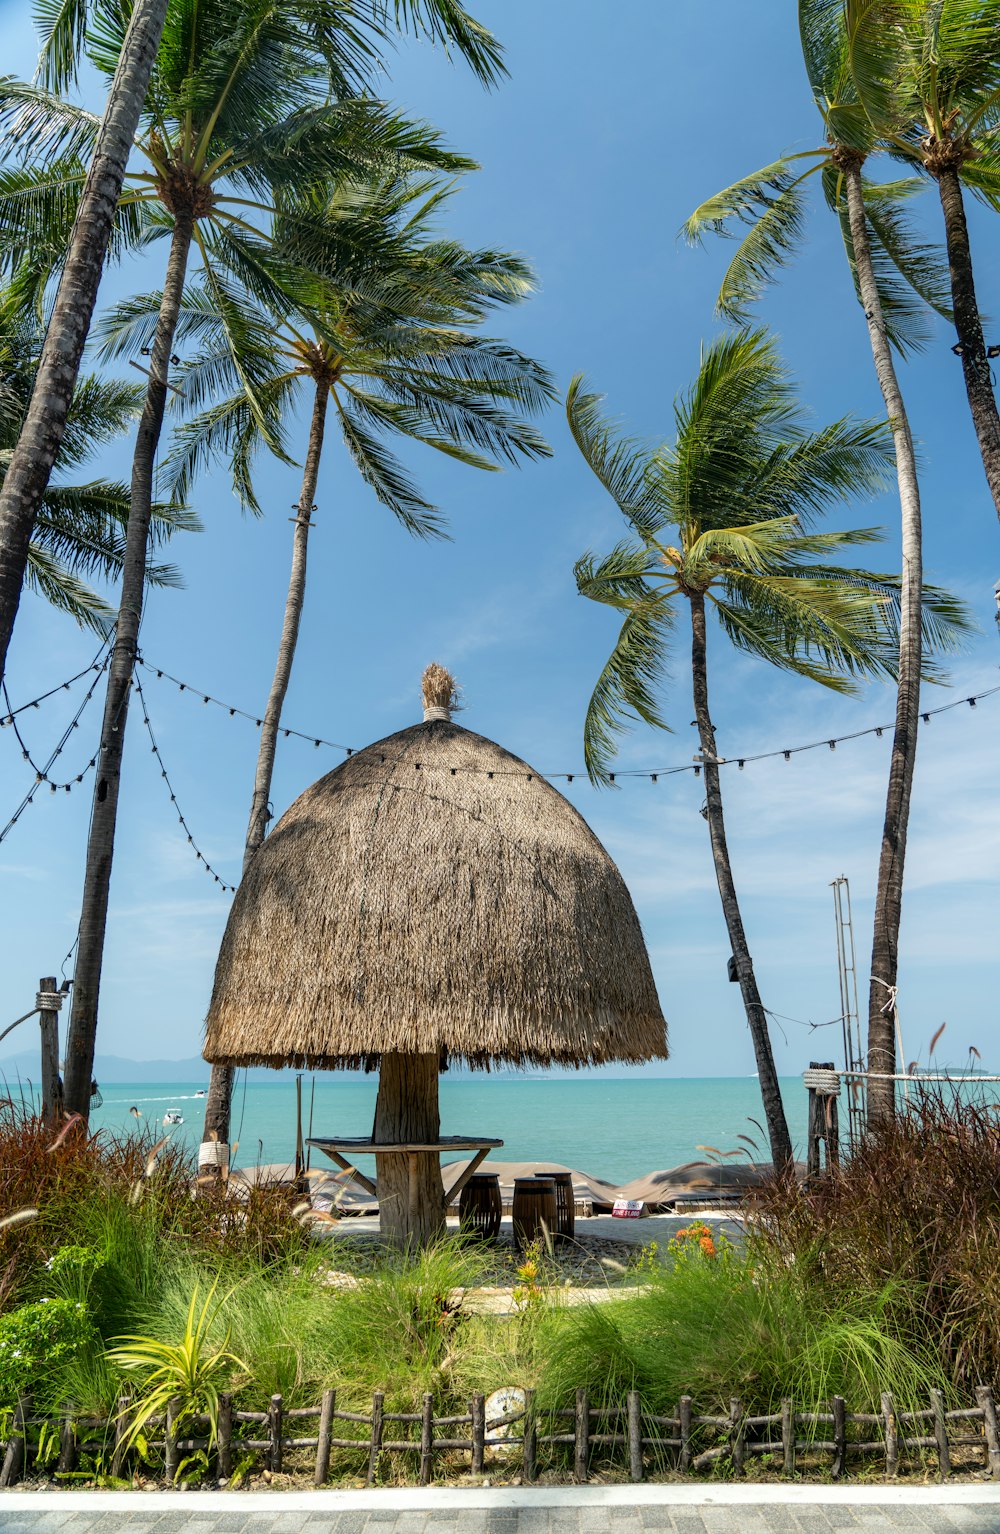 a hut with a thatched roof surrounded by palm trees